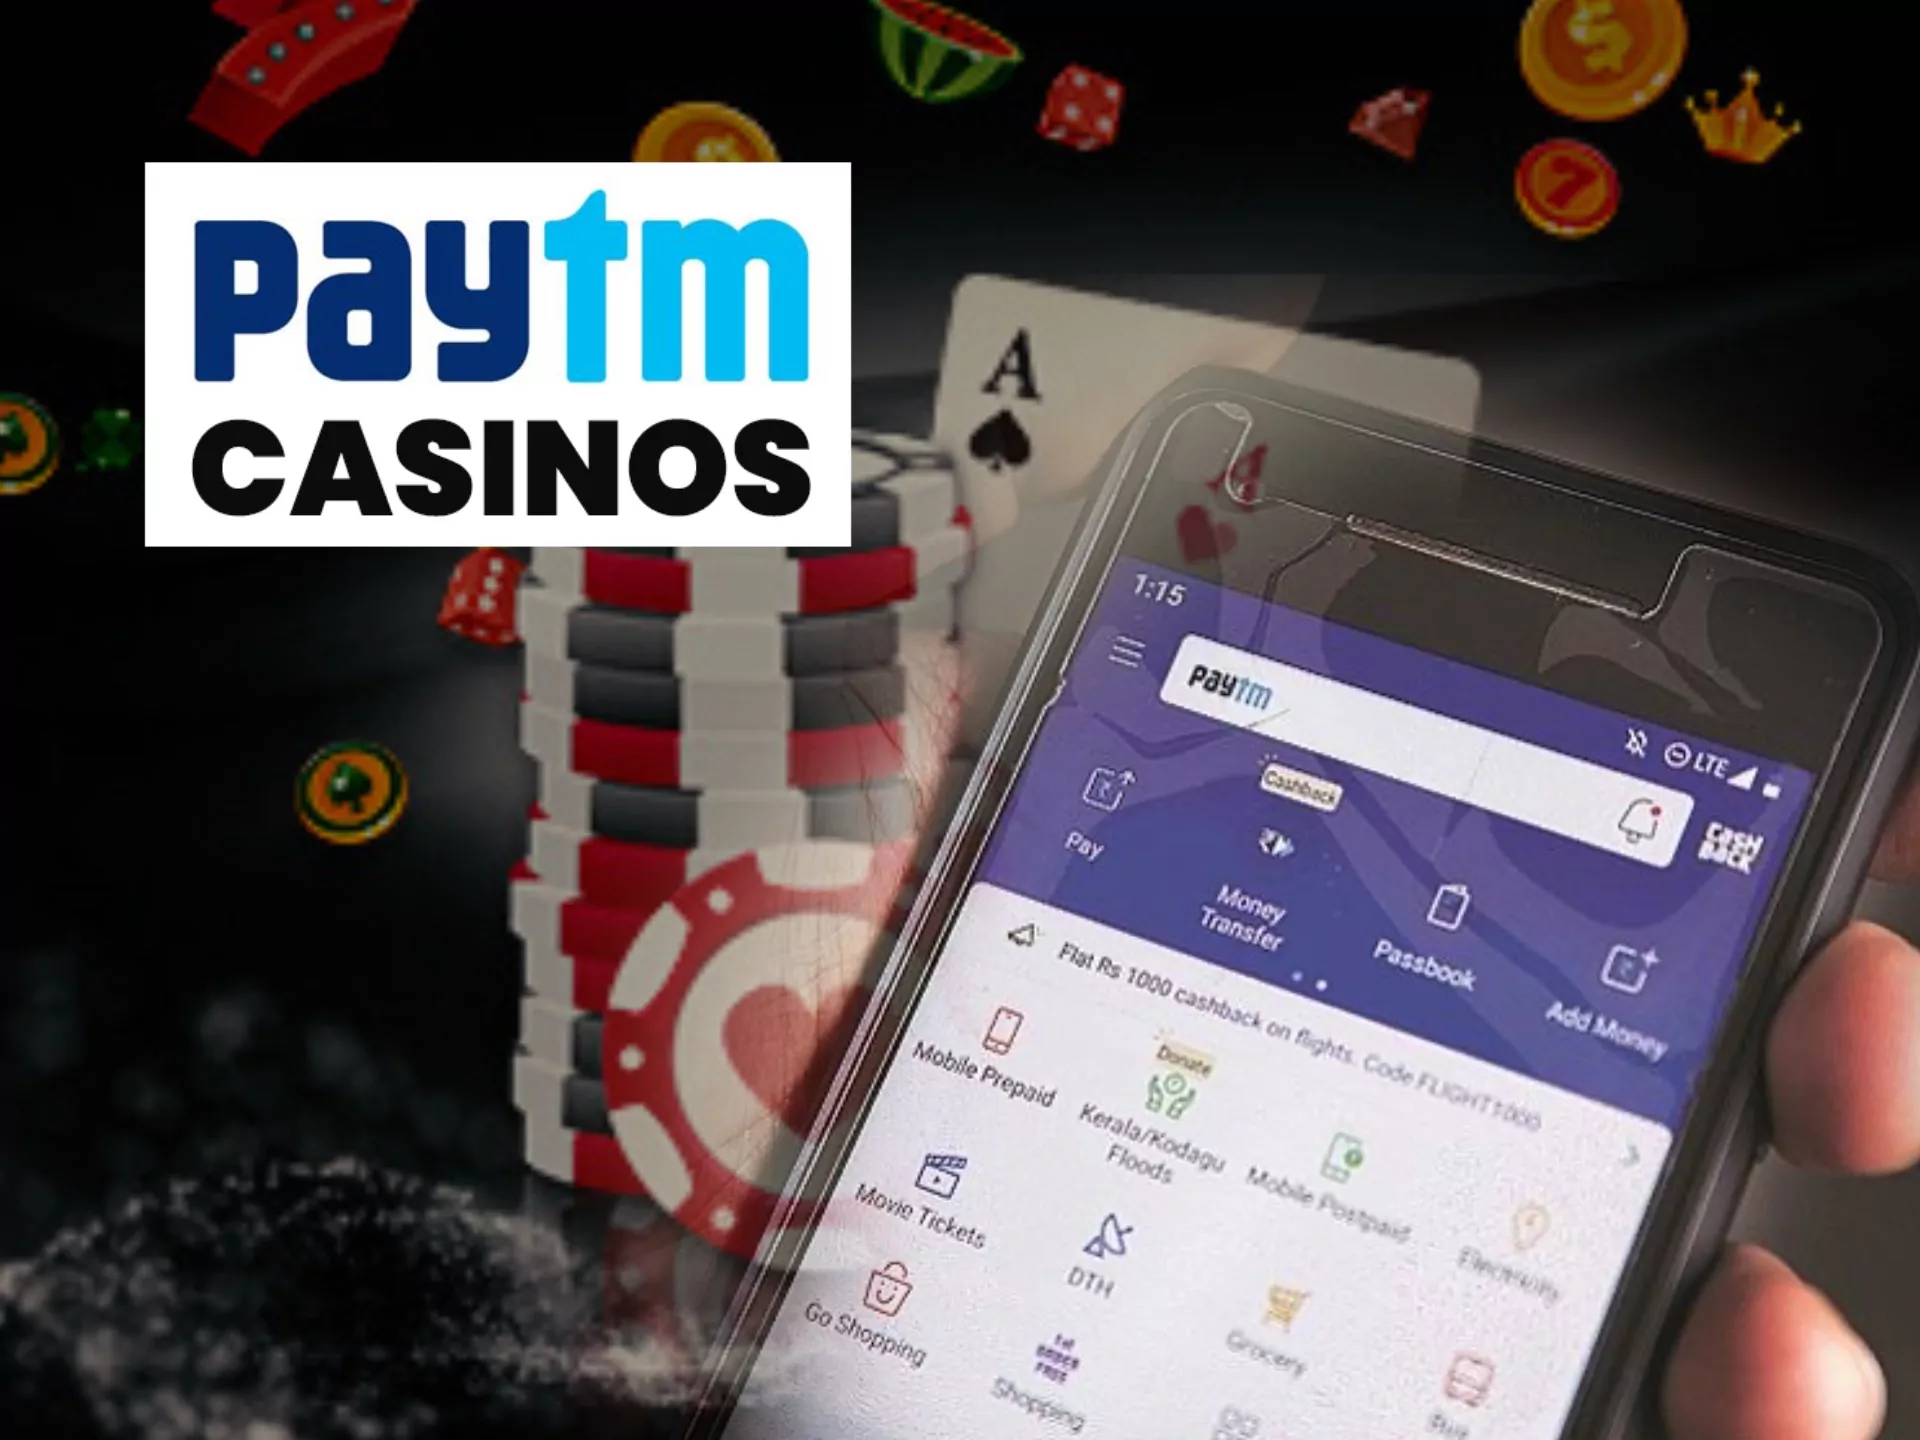 1xBet and Melbet casinos allow to withdraw money with Paytm.